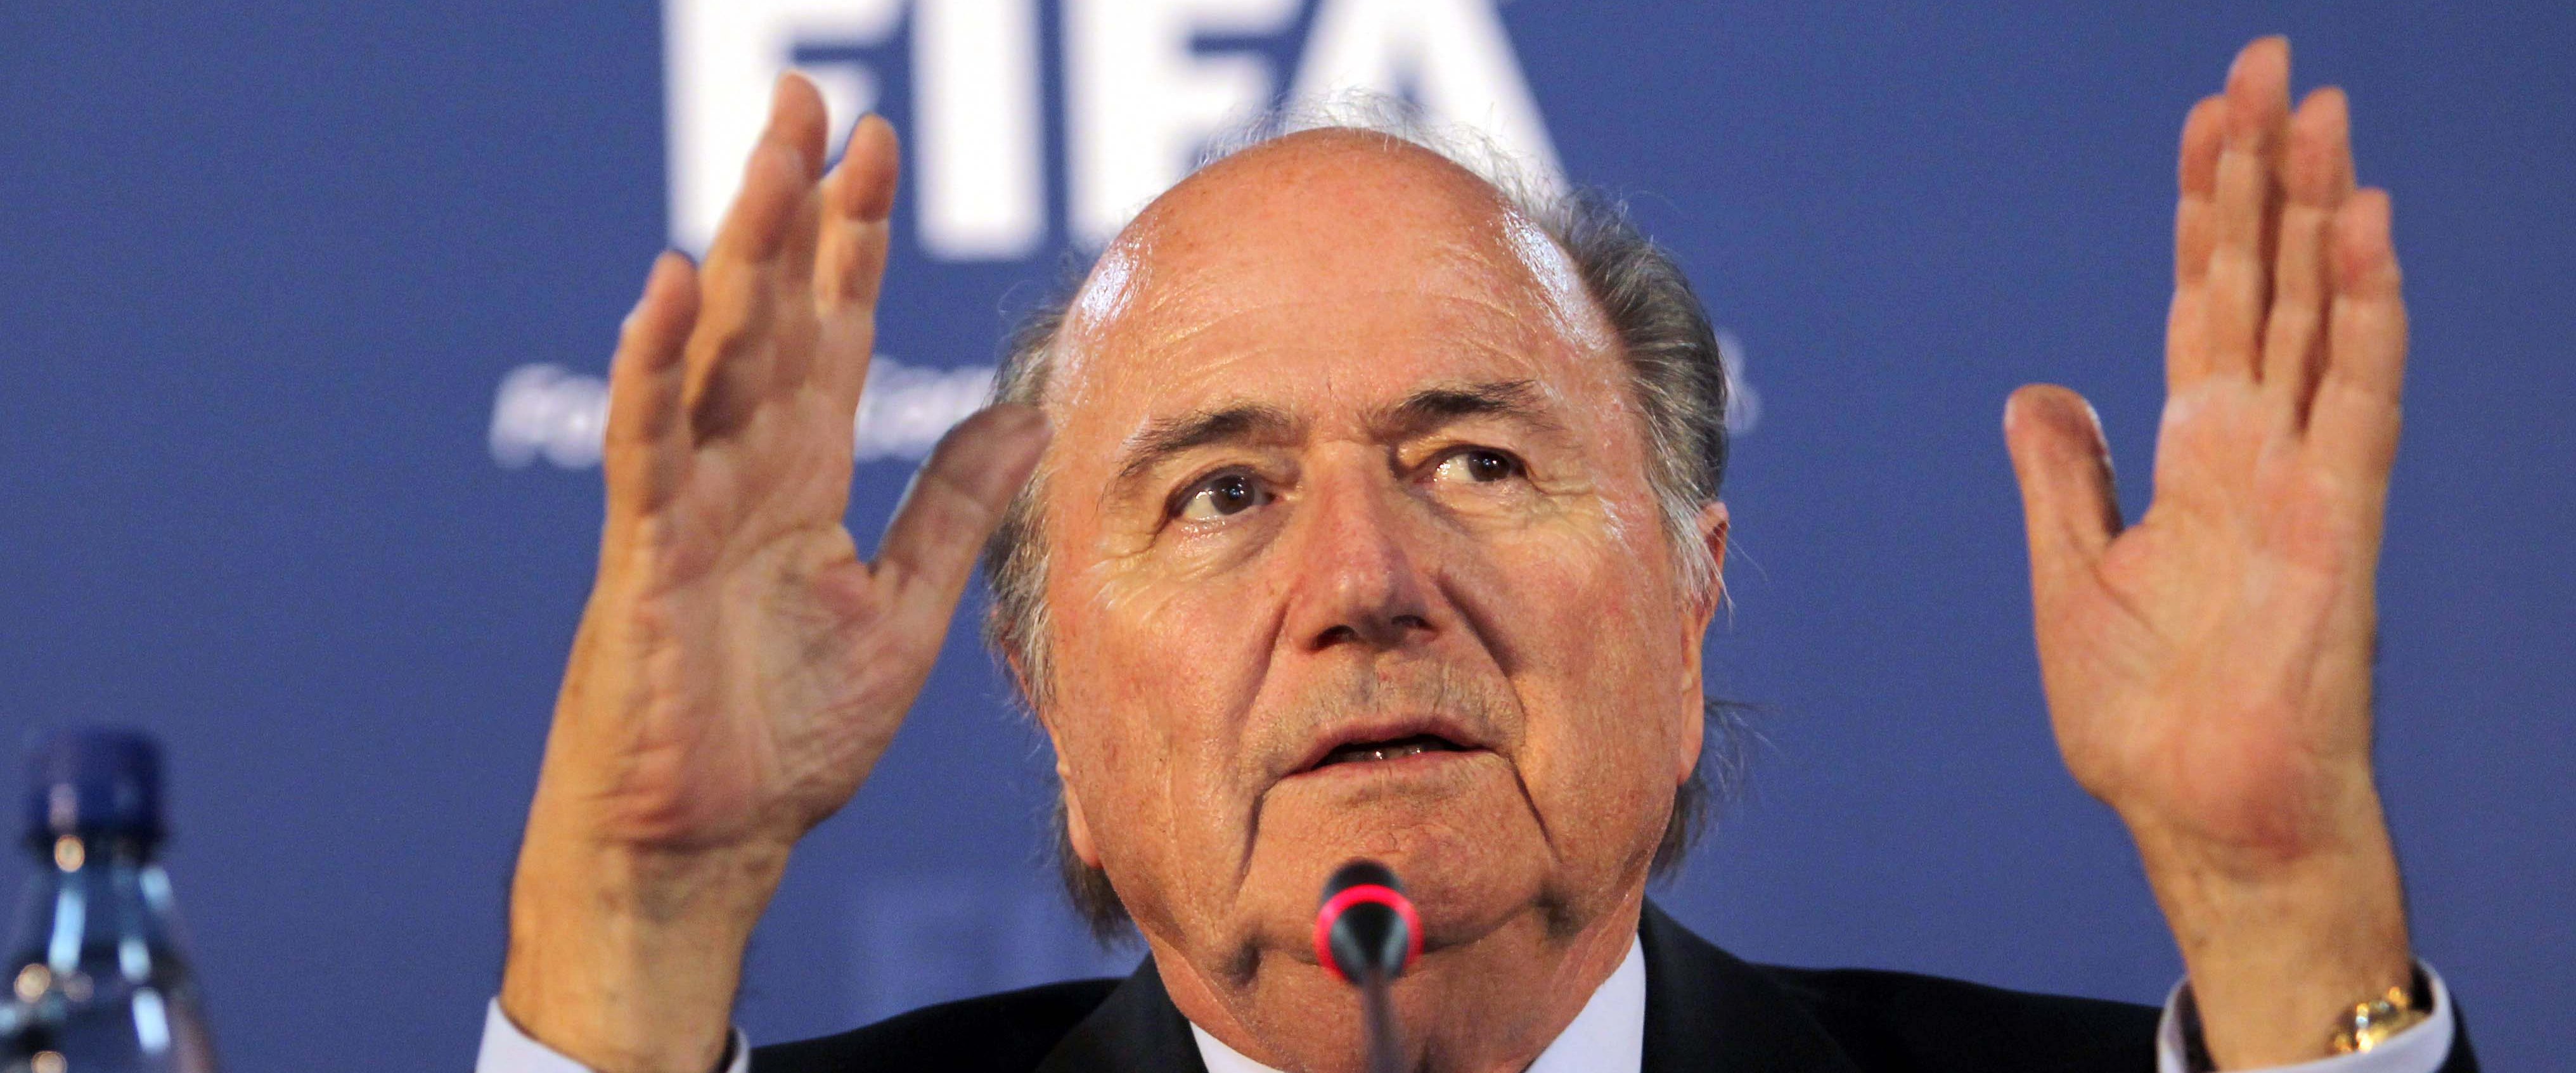 Hosting the 2022 World Cup in Qatar "is a mistake" former FIFA president says